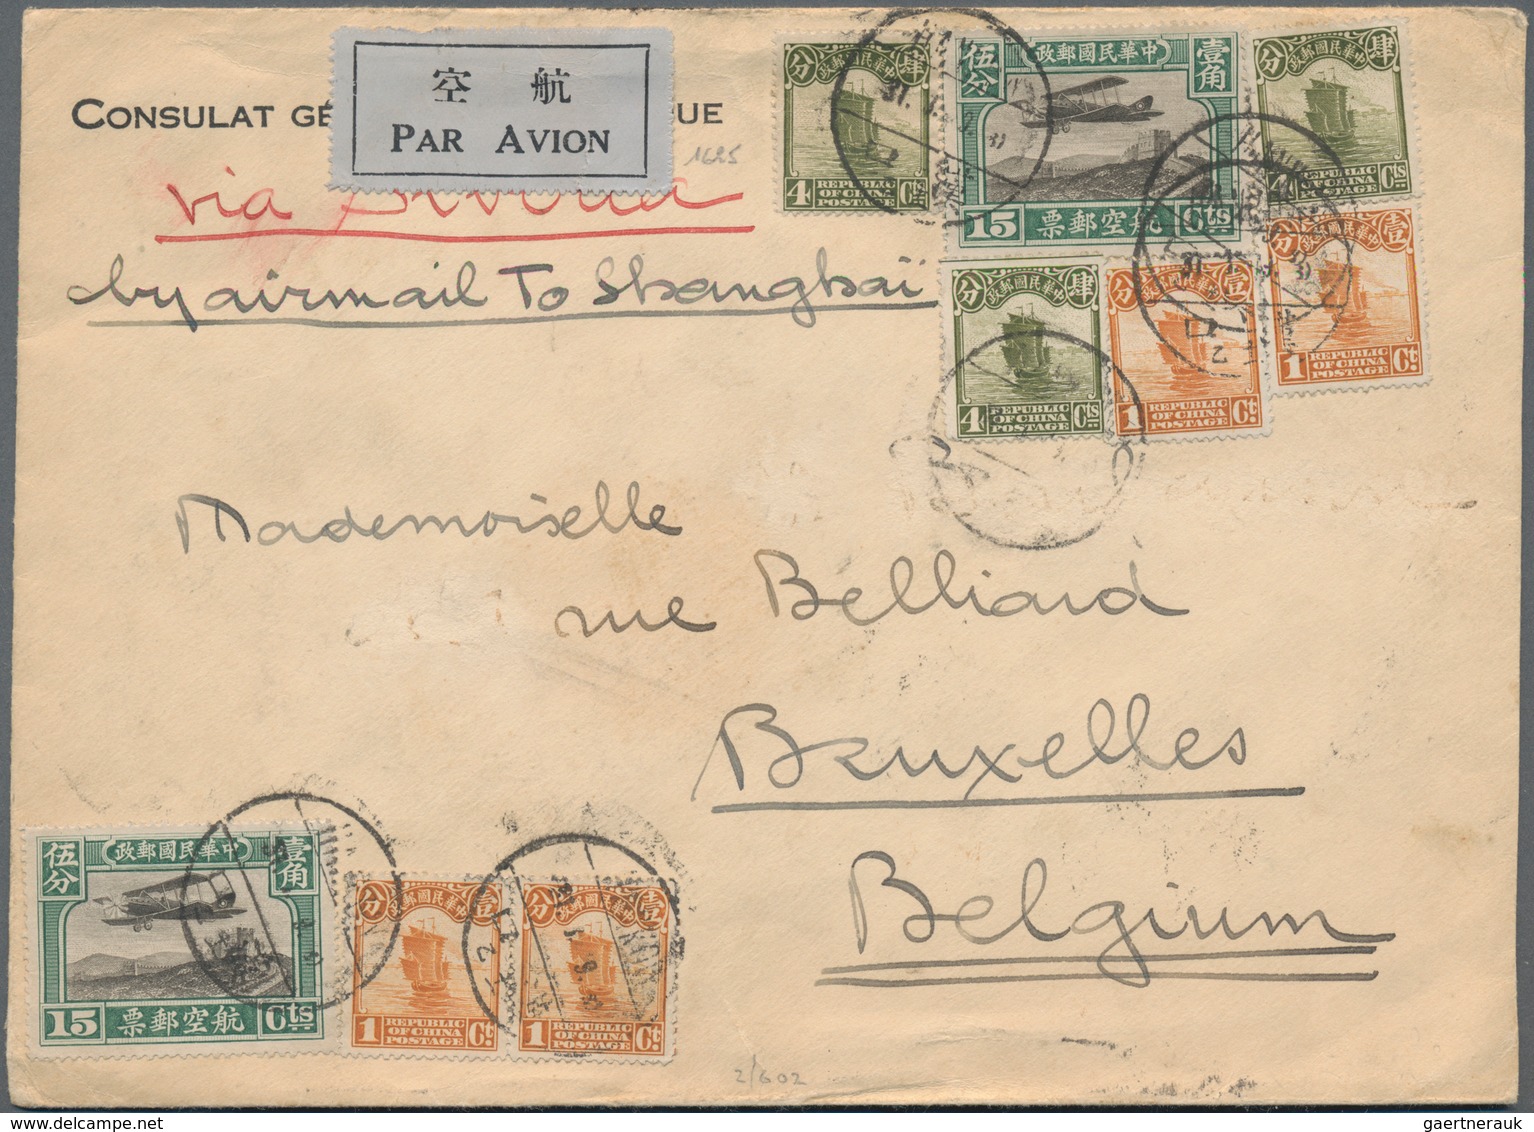 China - Flugpost: 1921 from, comprehensive collection with ca.50 airmail covers, comprising early fi